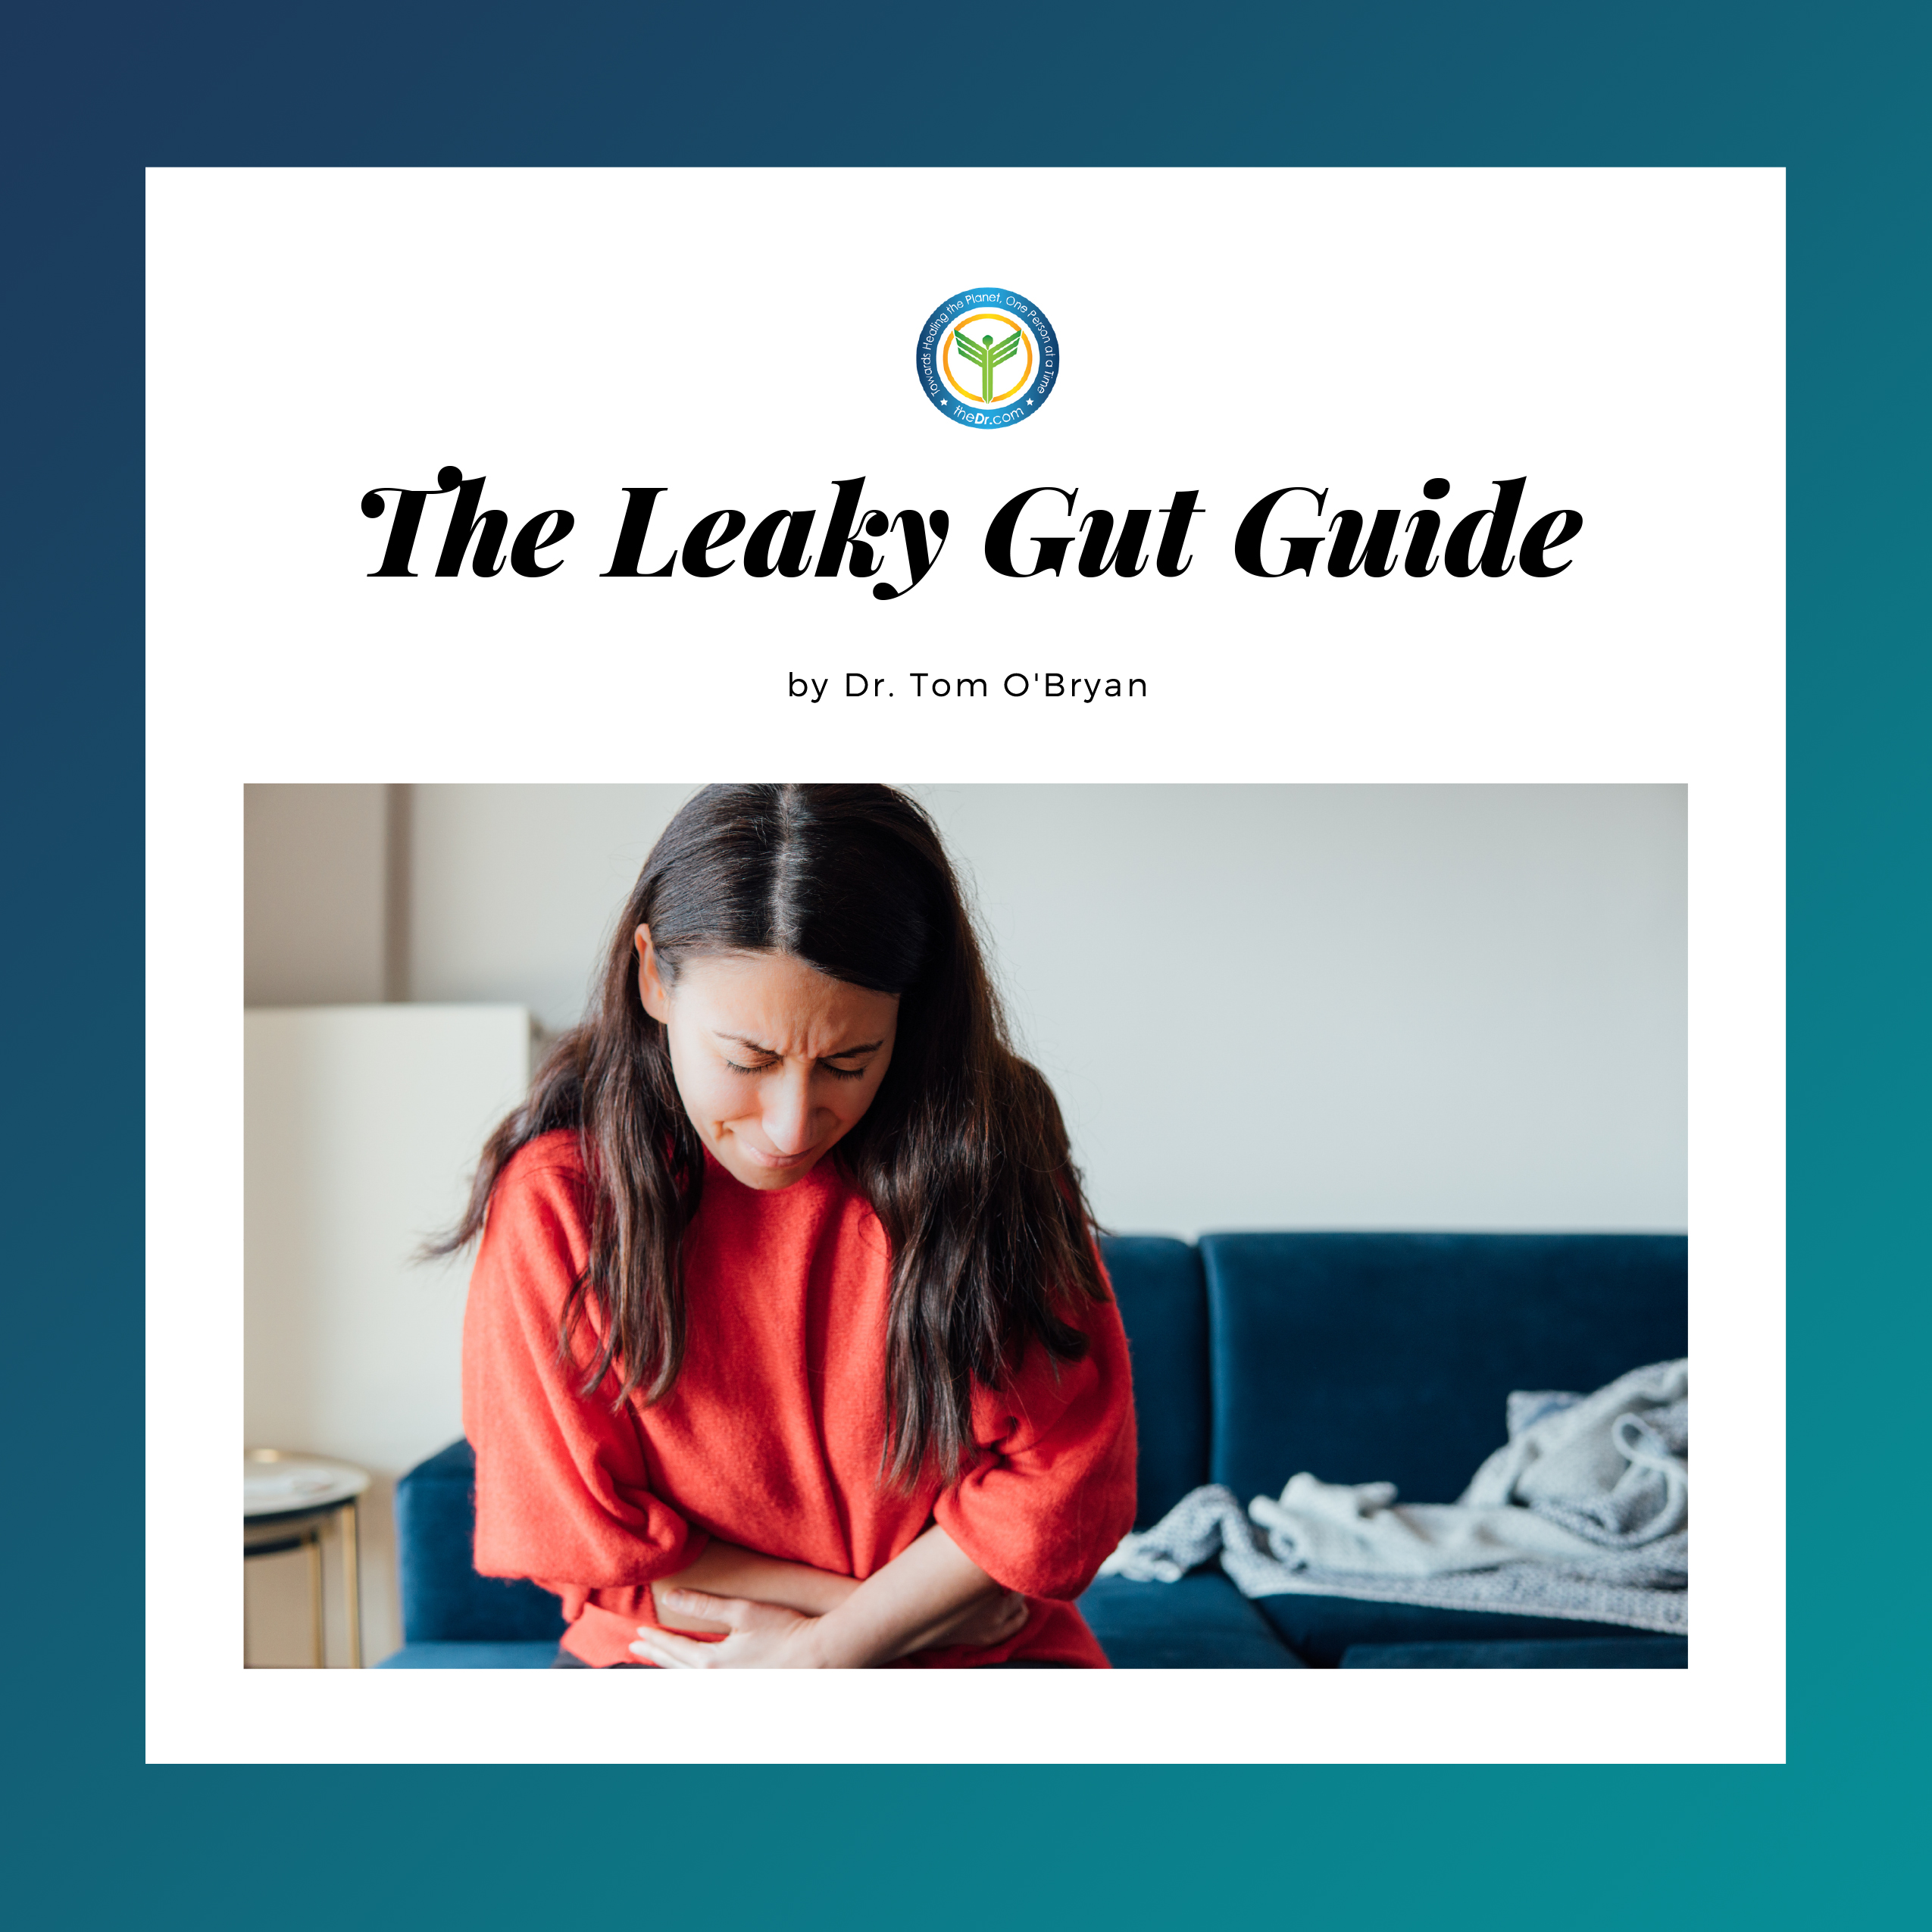 The Leaky Gut Guide by Dr. Tom O'Bryan